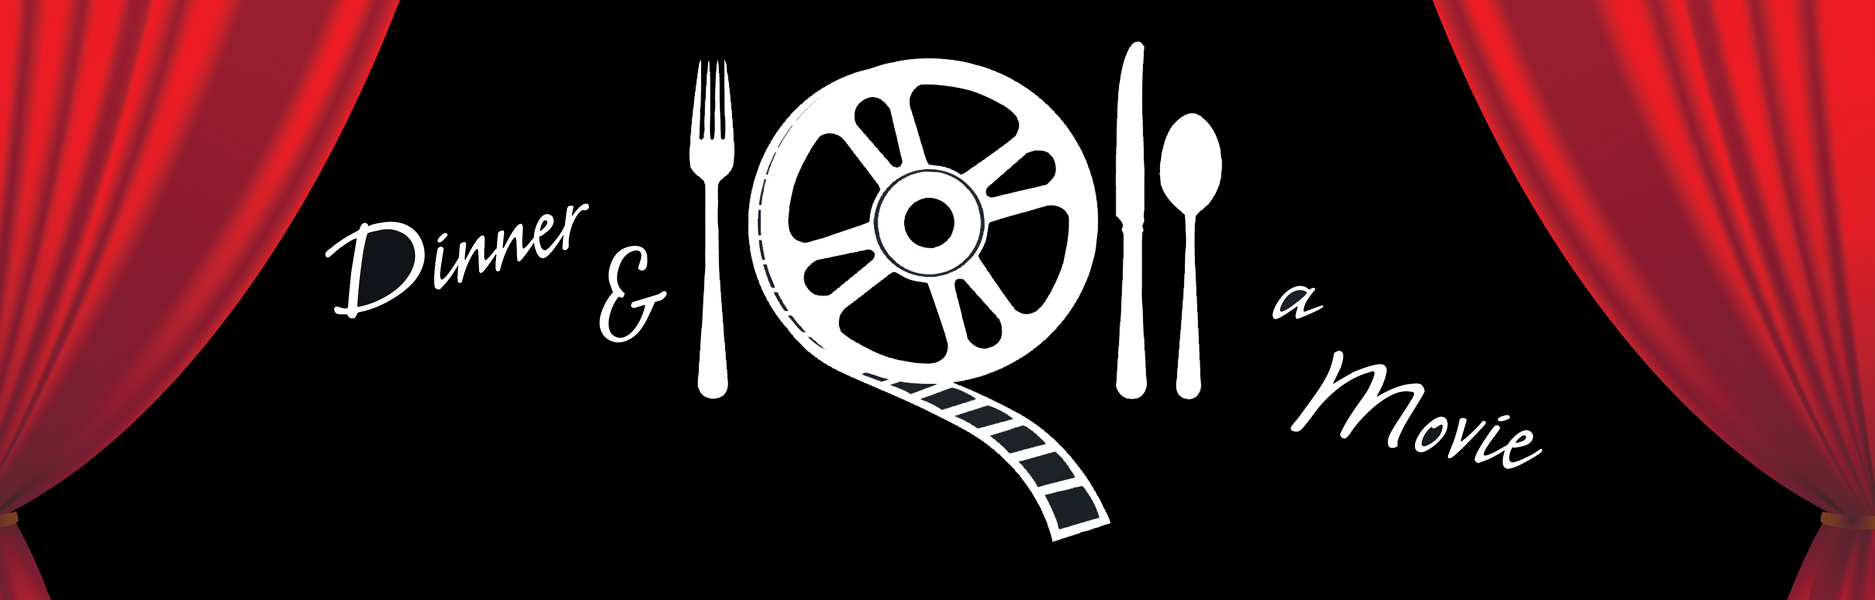 dinner-and-movie-graphic.jpg